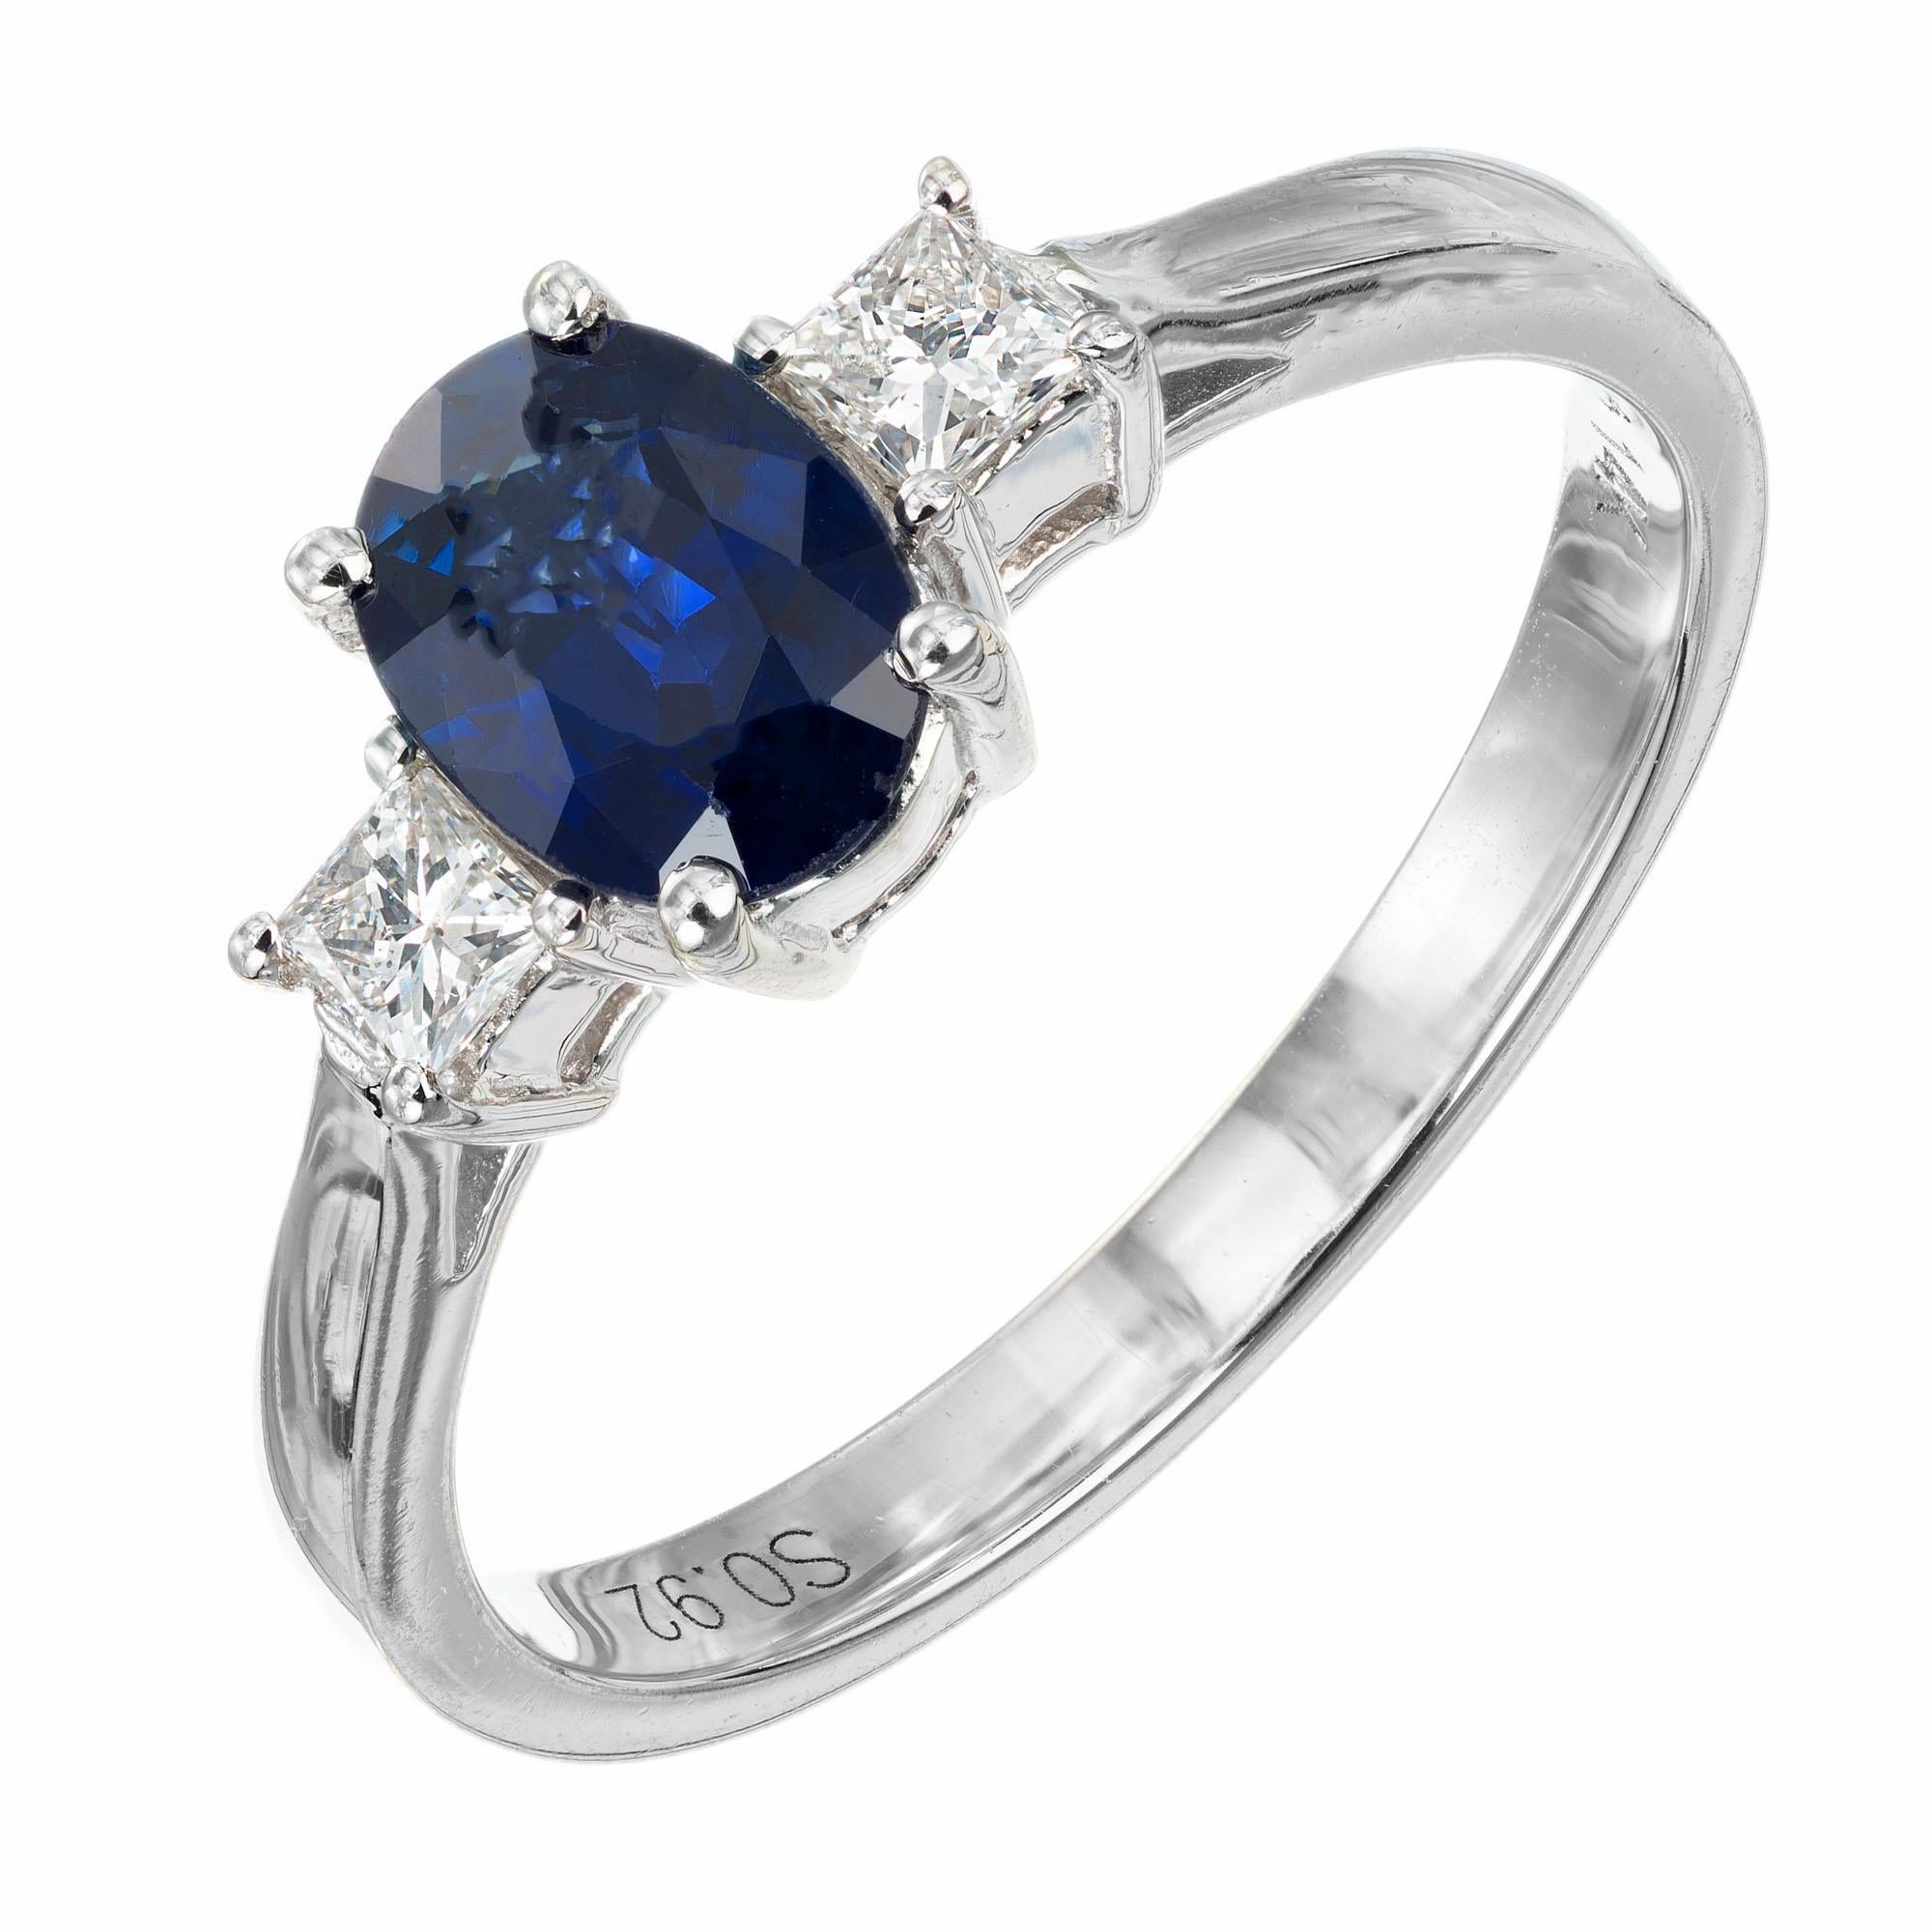 Oval and diamond engagement ring. GIA certified Natural no heat Royal blue center sapphire, with 2 princess cut side diamonds in a  14k white gold three-stone setting.  

1 GIA certified #2145648629 natural no heat oval Sapphire 6.8 x 5.10 x 3.20mm,